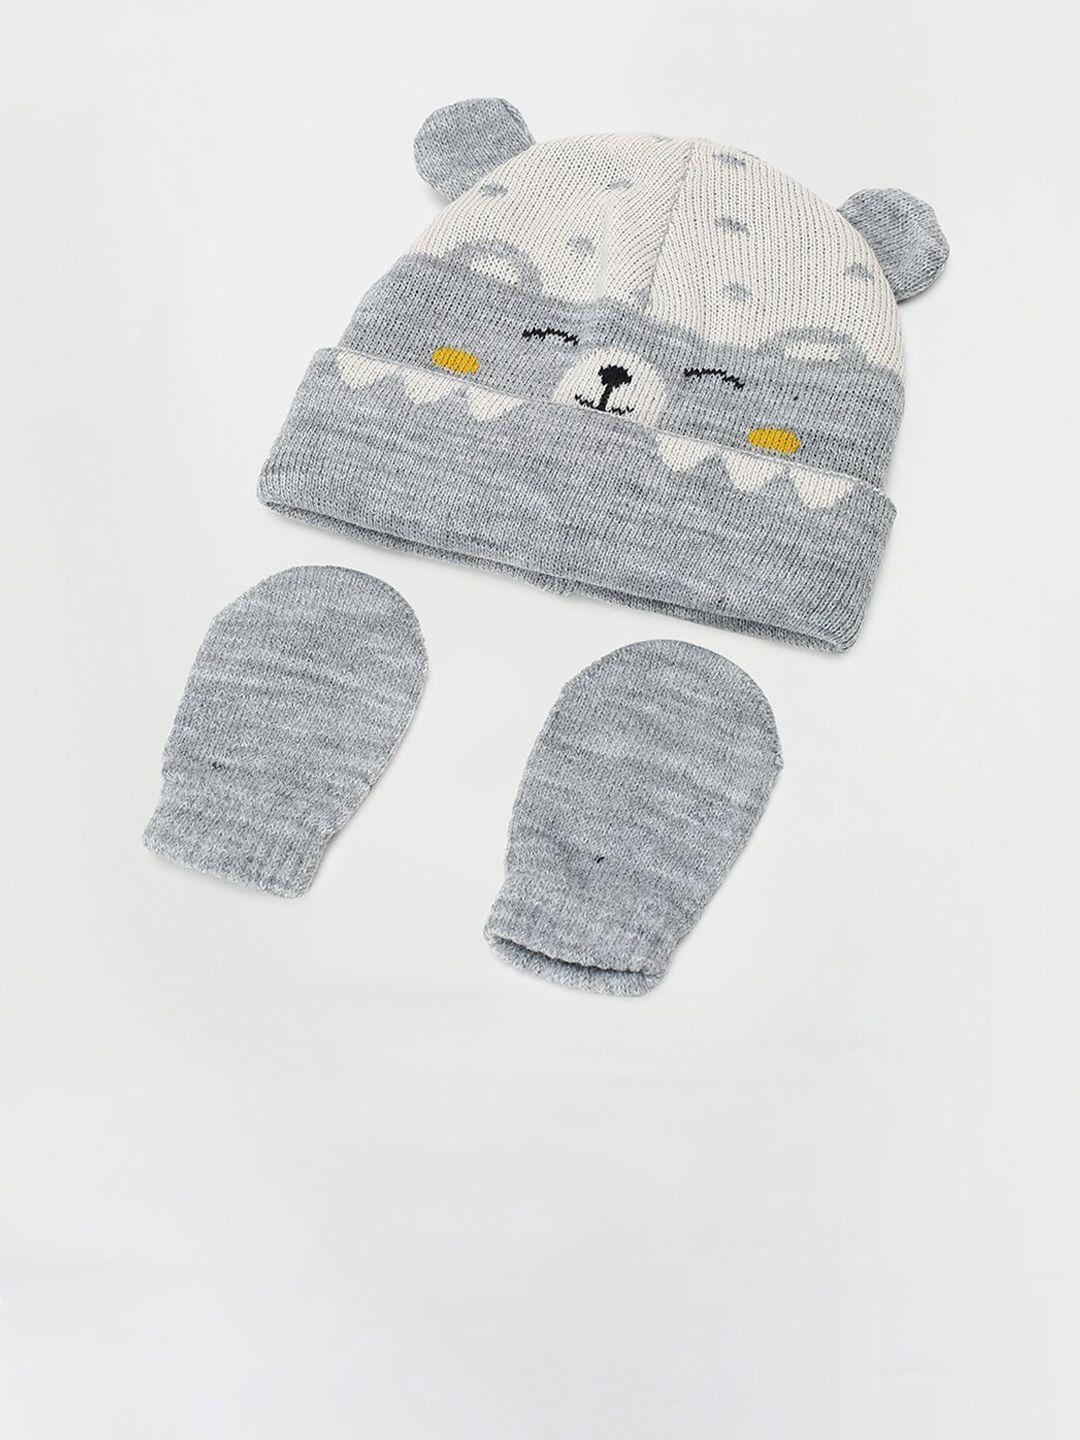 max boys acrylic mittens with cap